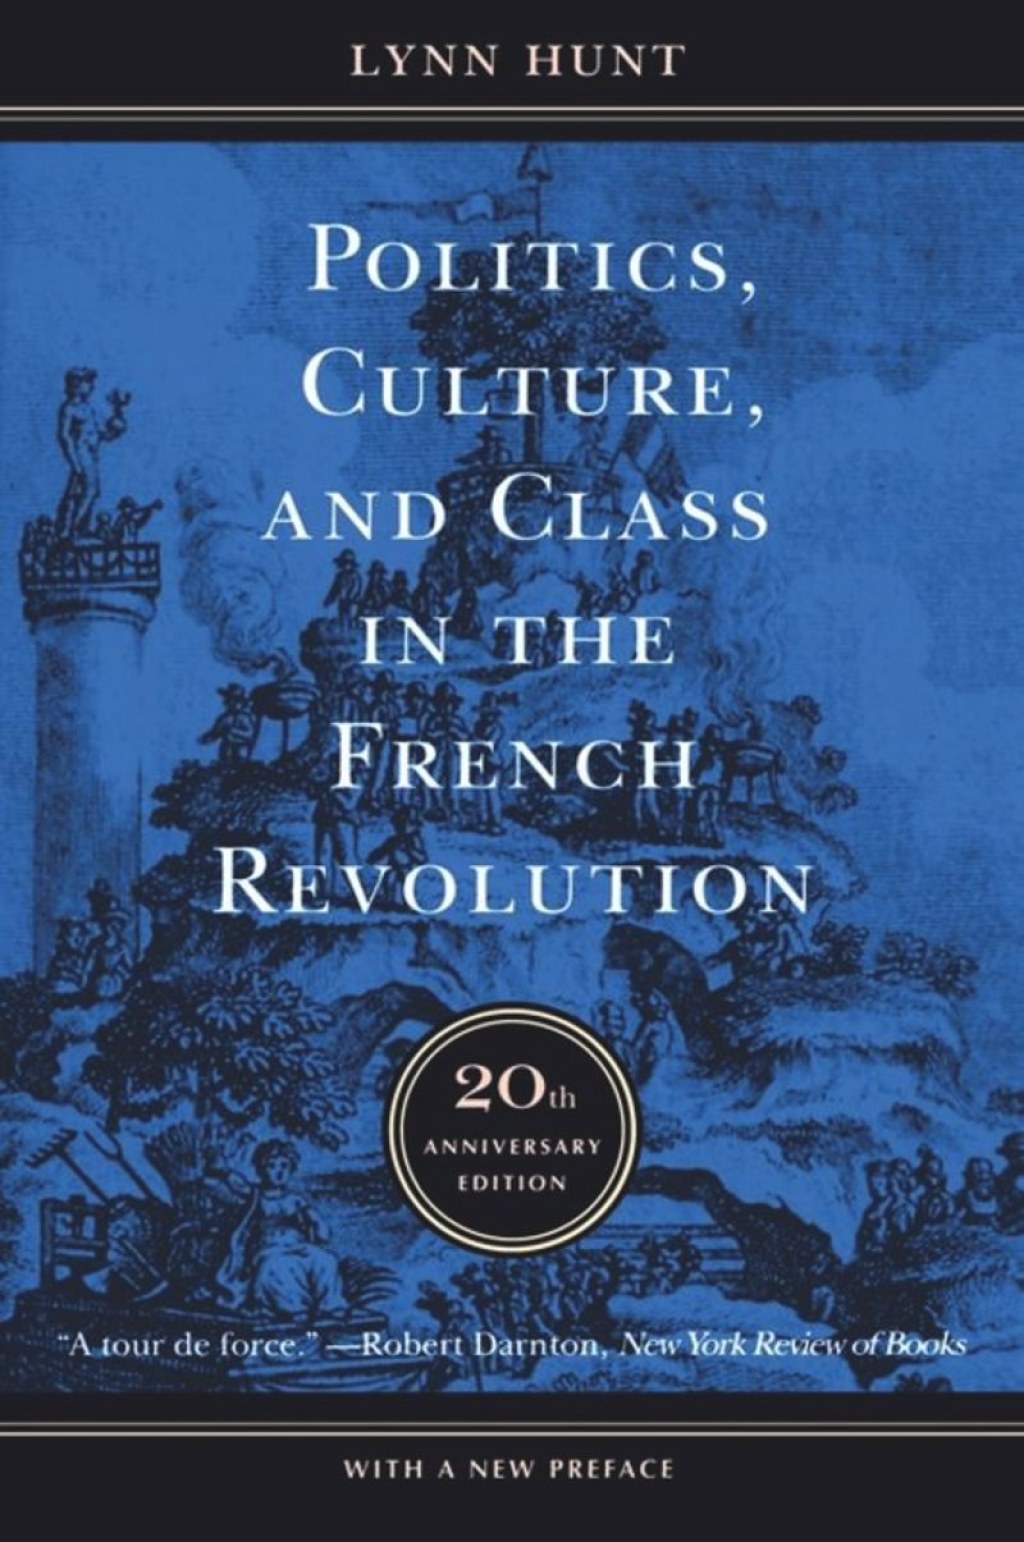 french politics culture & society journal - Politics, Culture, and Class in the French Revolution